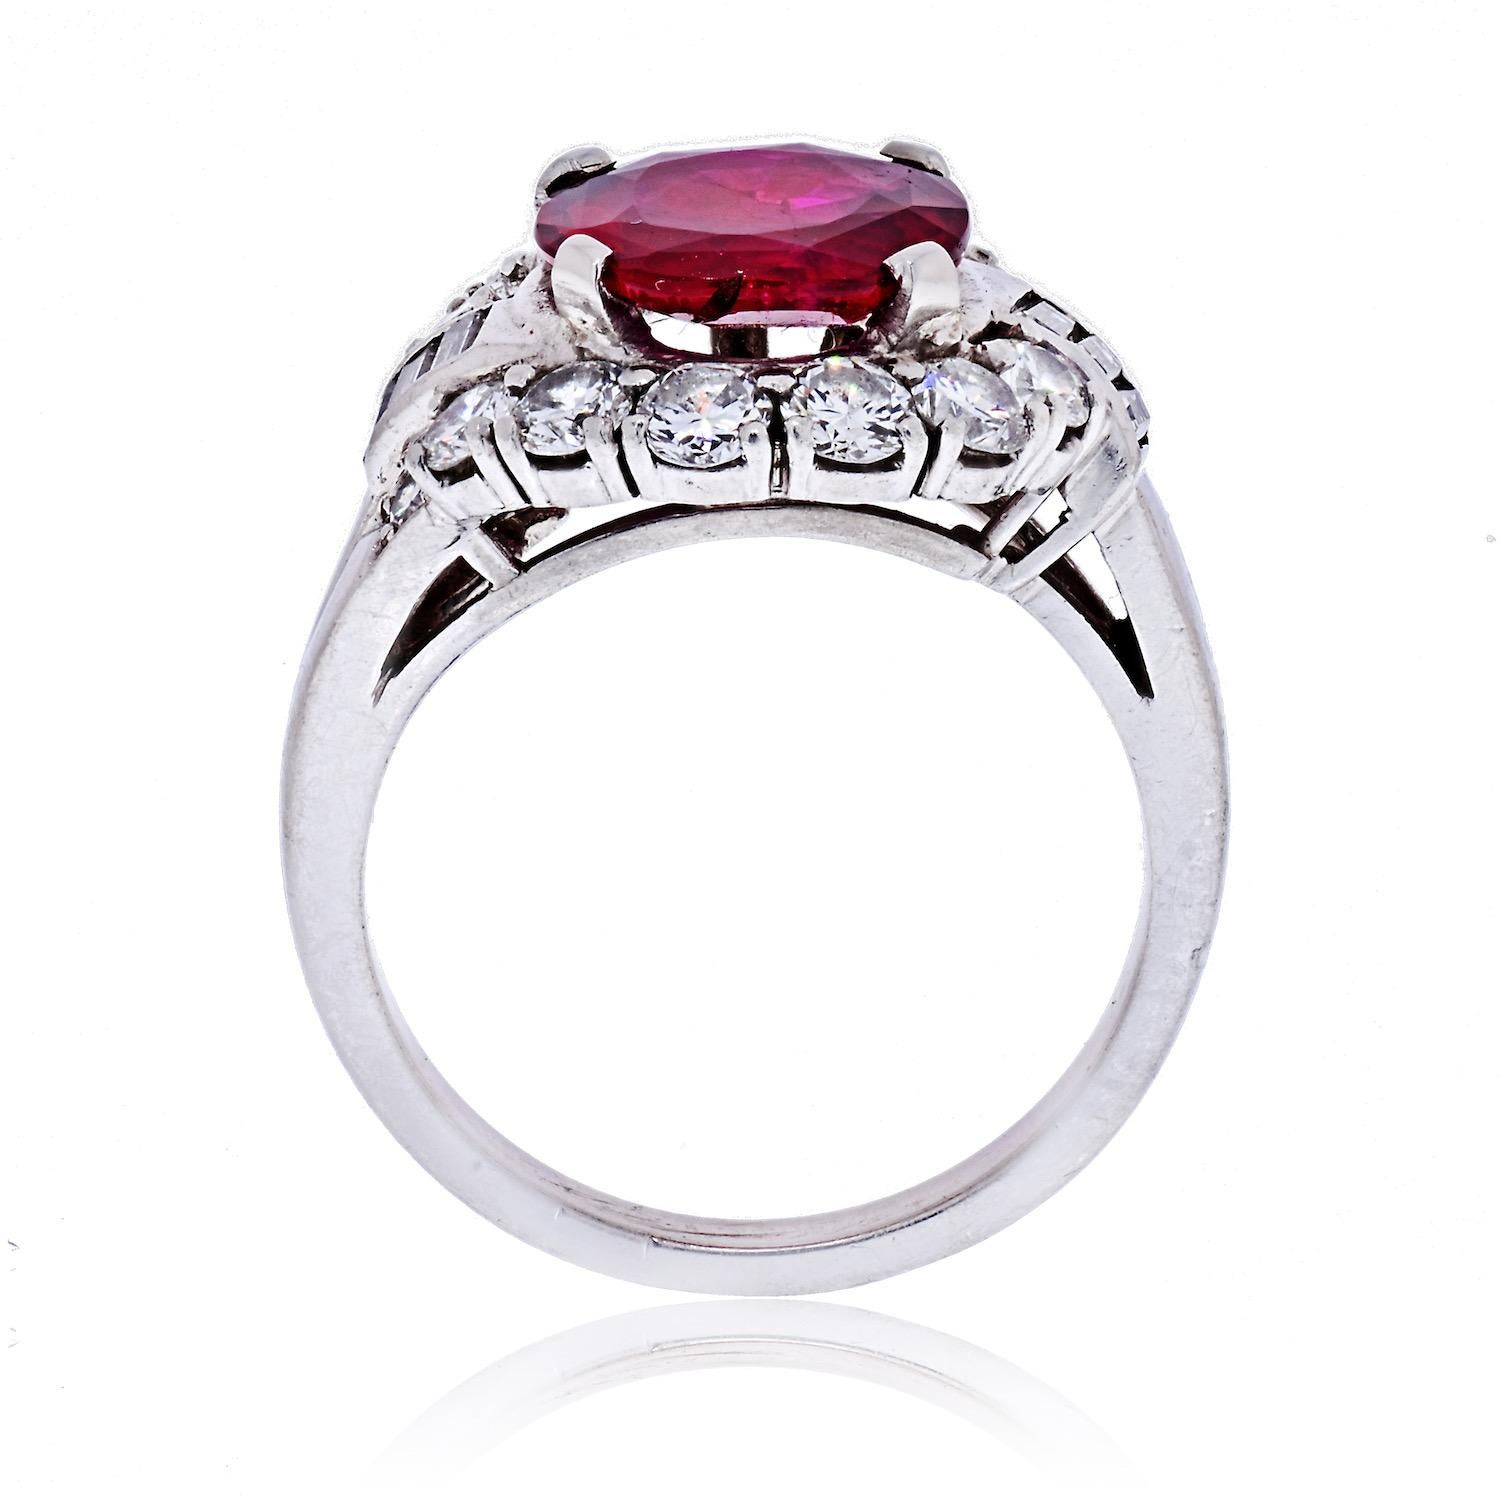 J.E. Caldwell & Co. 2.52 Carat Cushion Cut Ruby Diamond Platinum Cocktail Ring In New Condition For Sale In Miami, FL